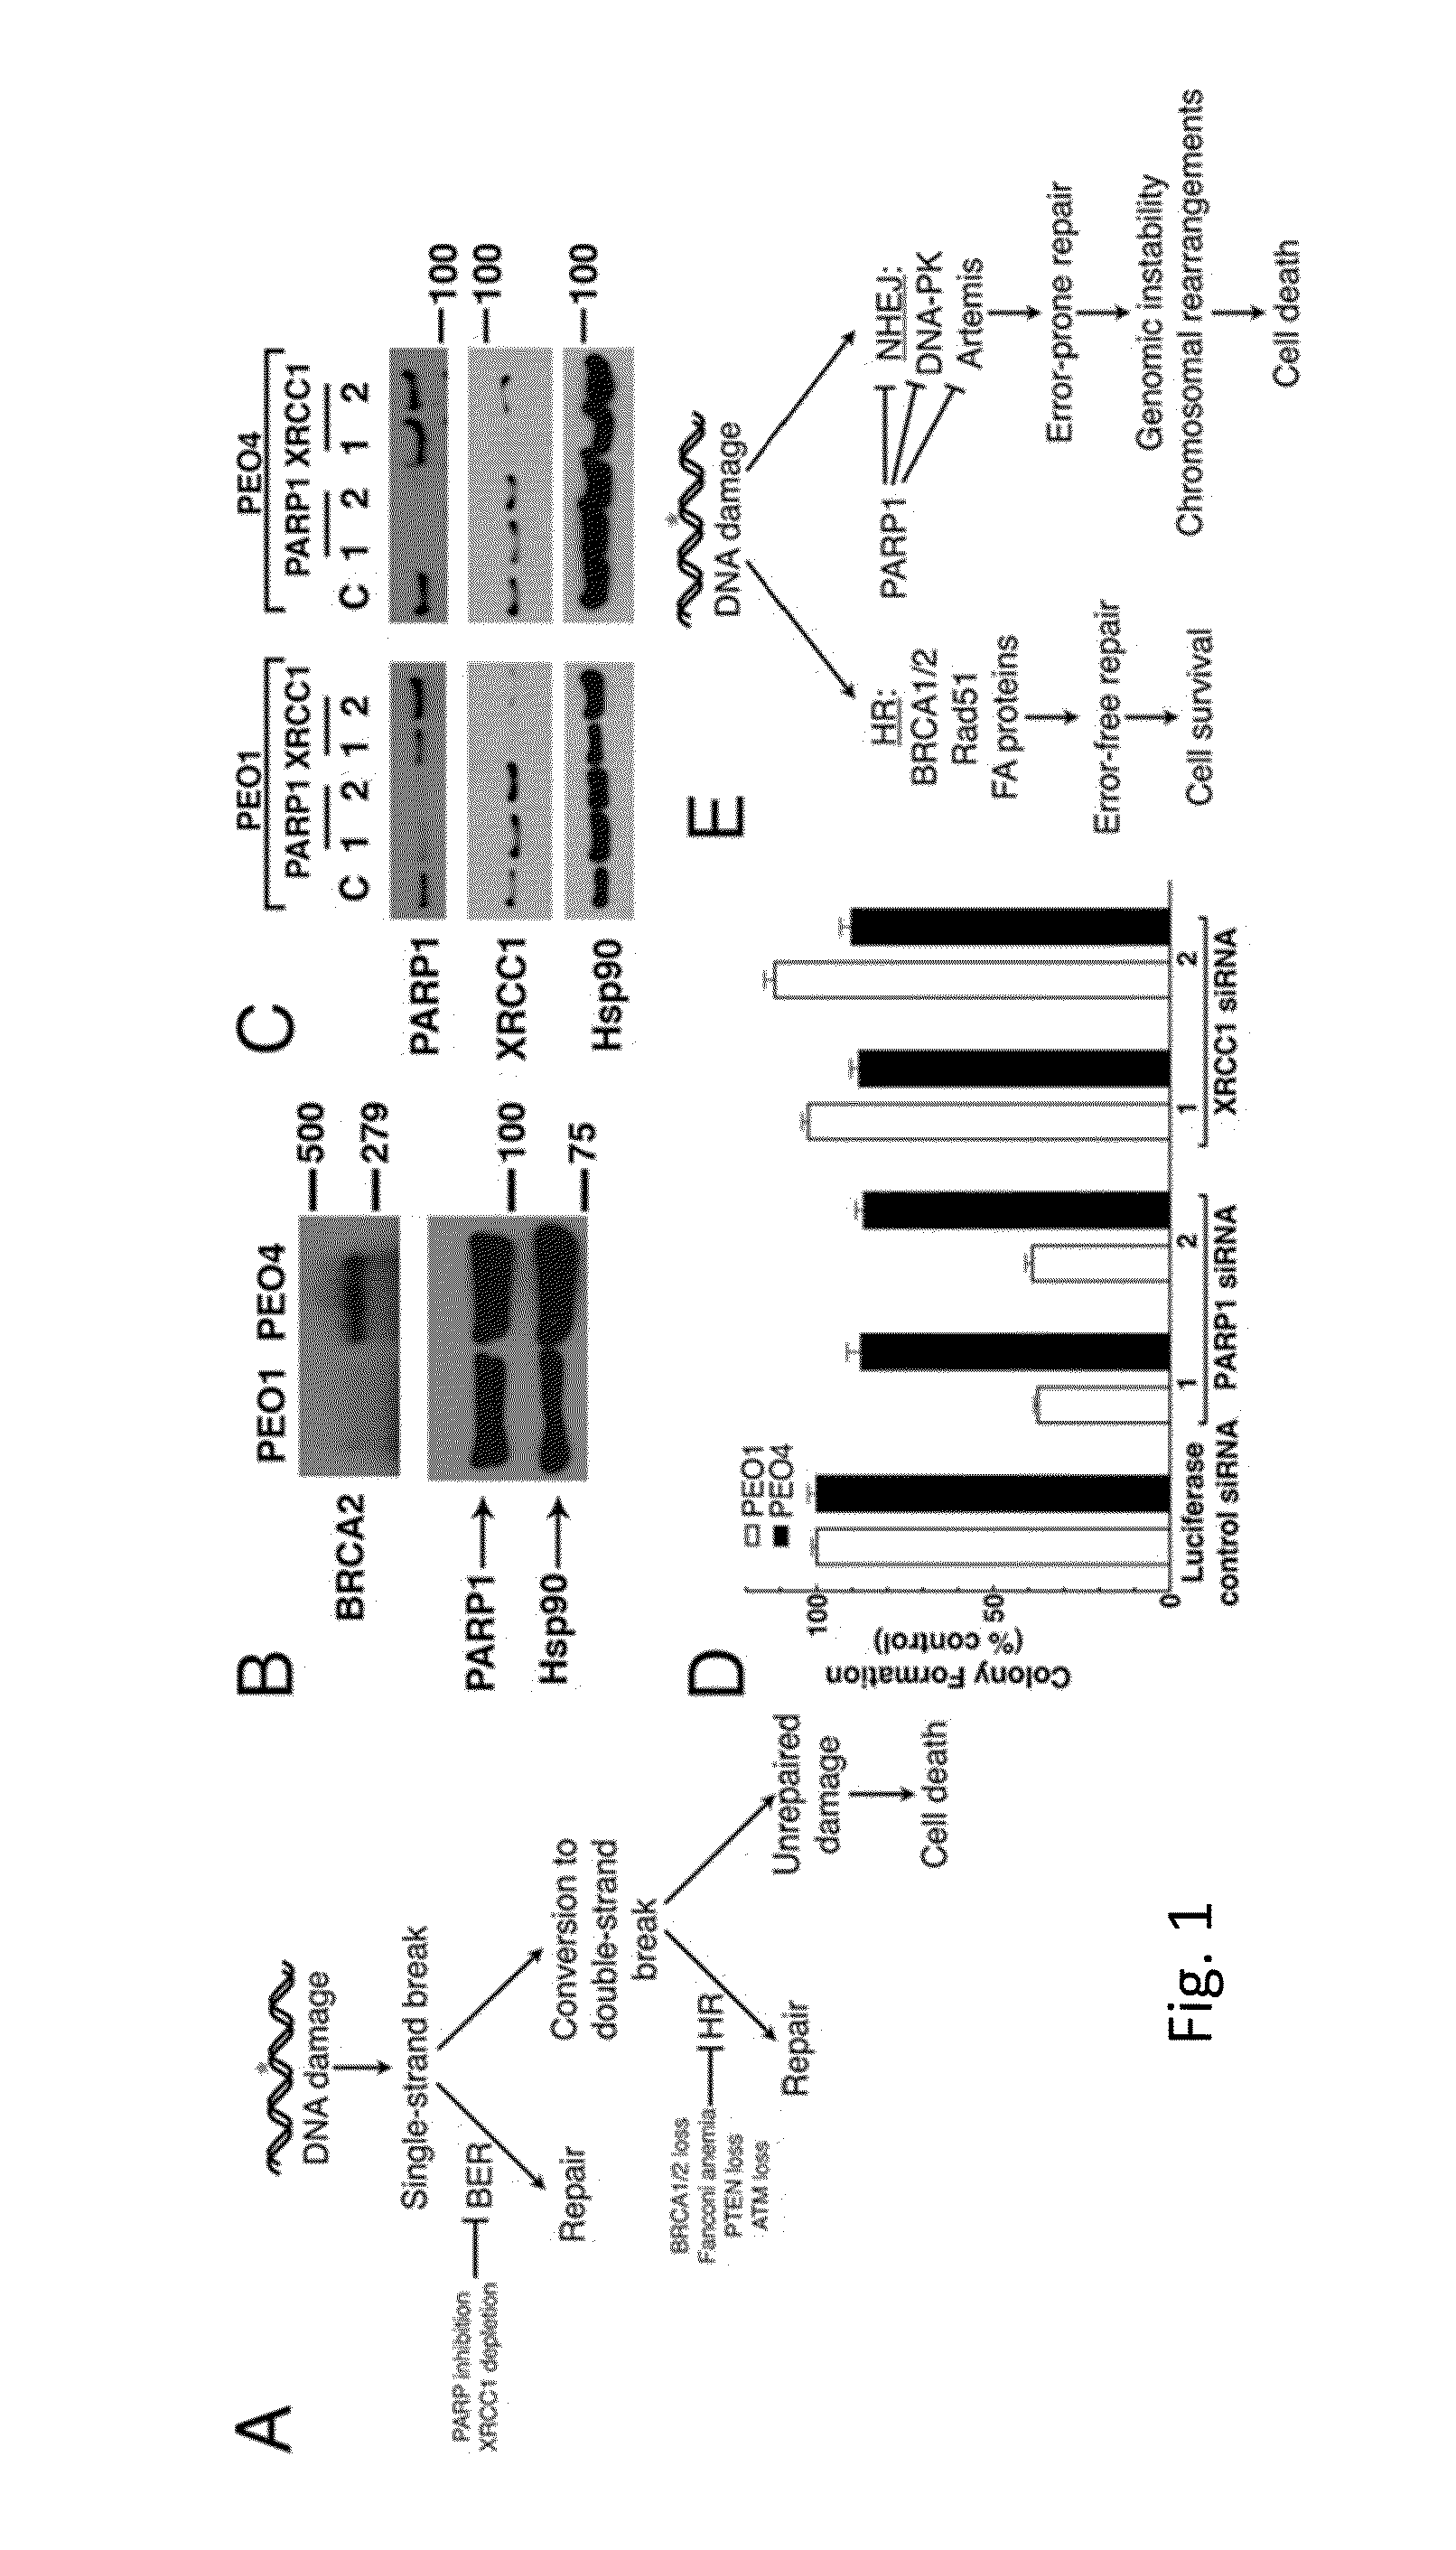 Methods and materials for assessing responsiveness to parp inhibitors and platinating agents